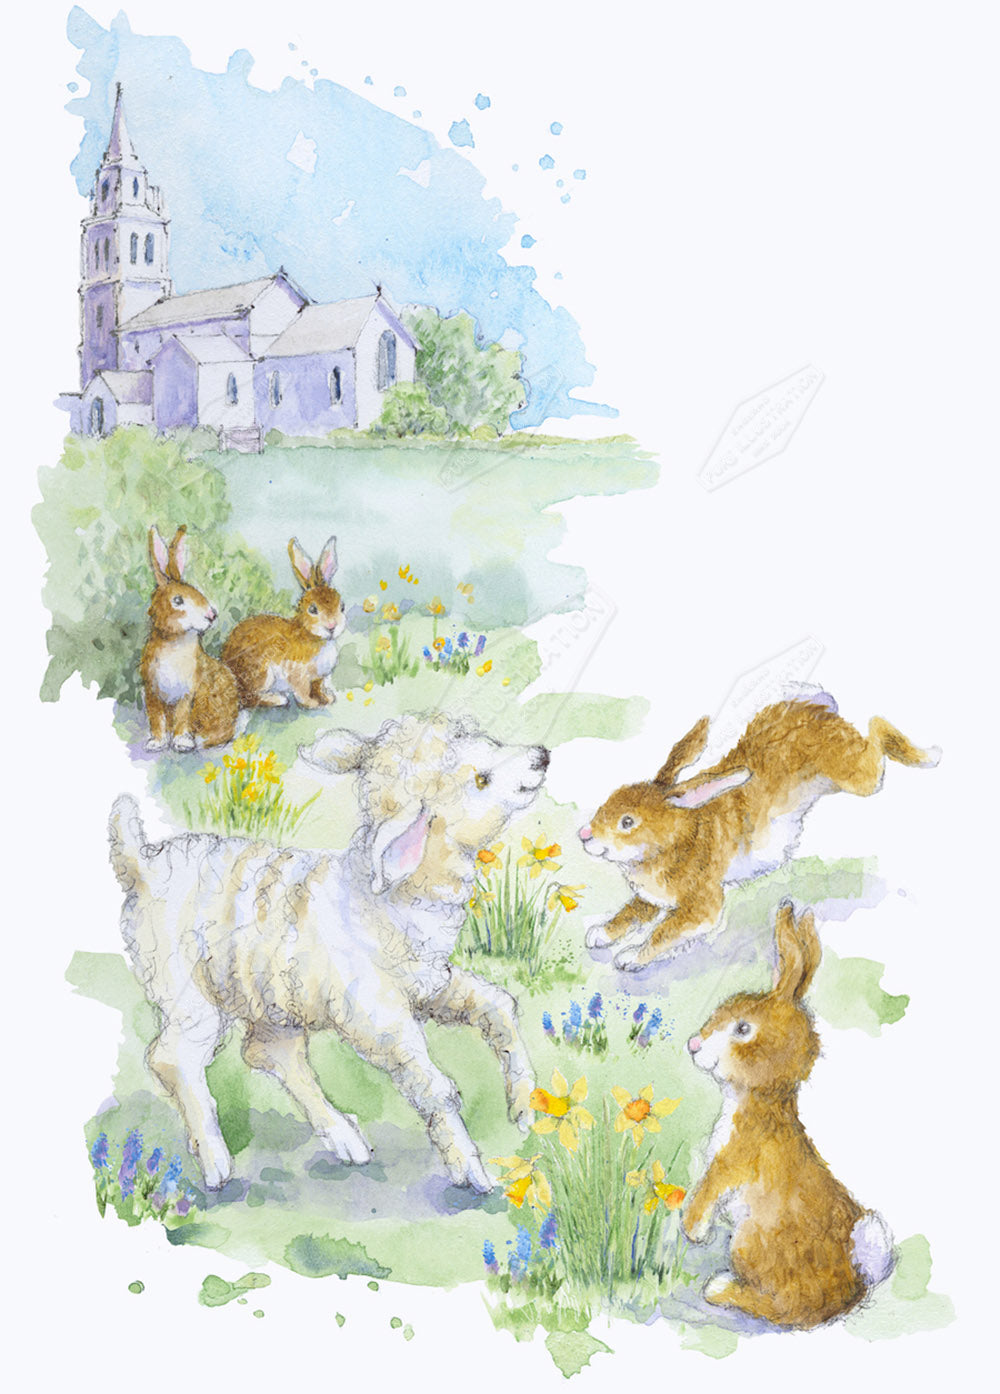 00027134JPA- Jan Pashley is represented by Pure Art Licensing Agency - Easter Greeting Card Design